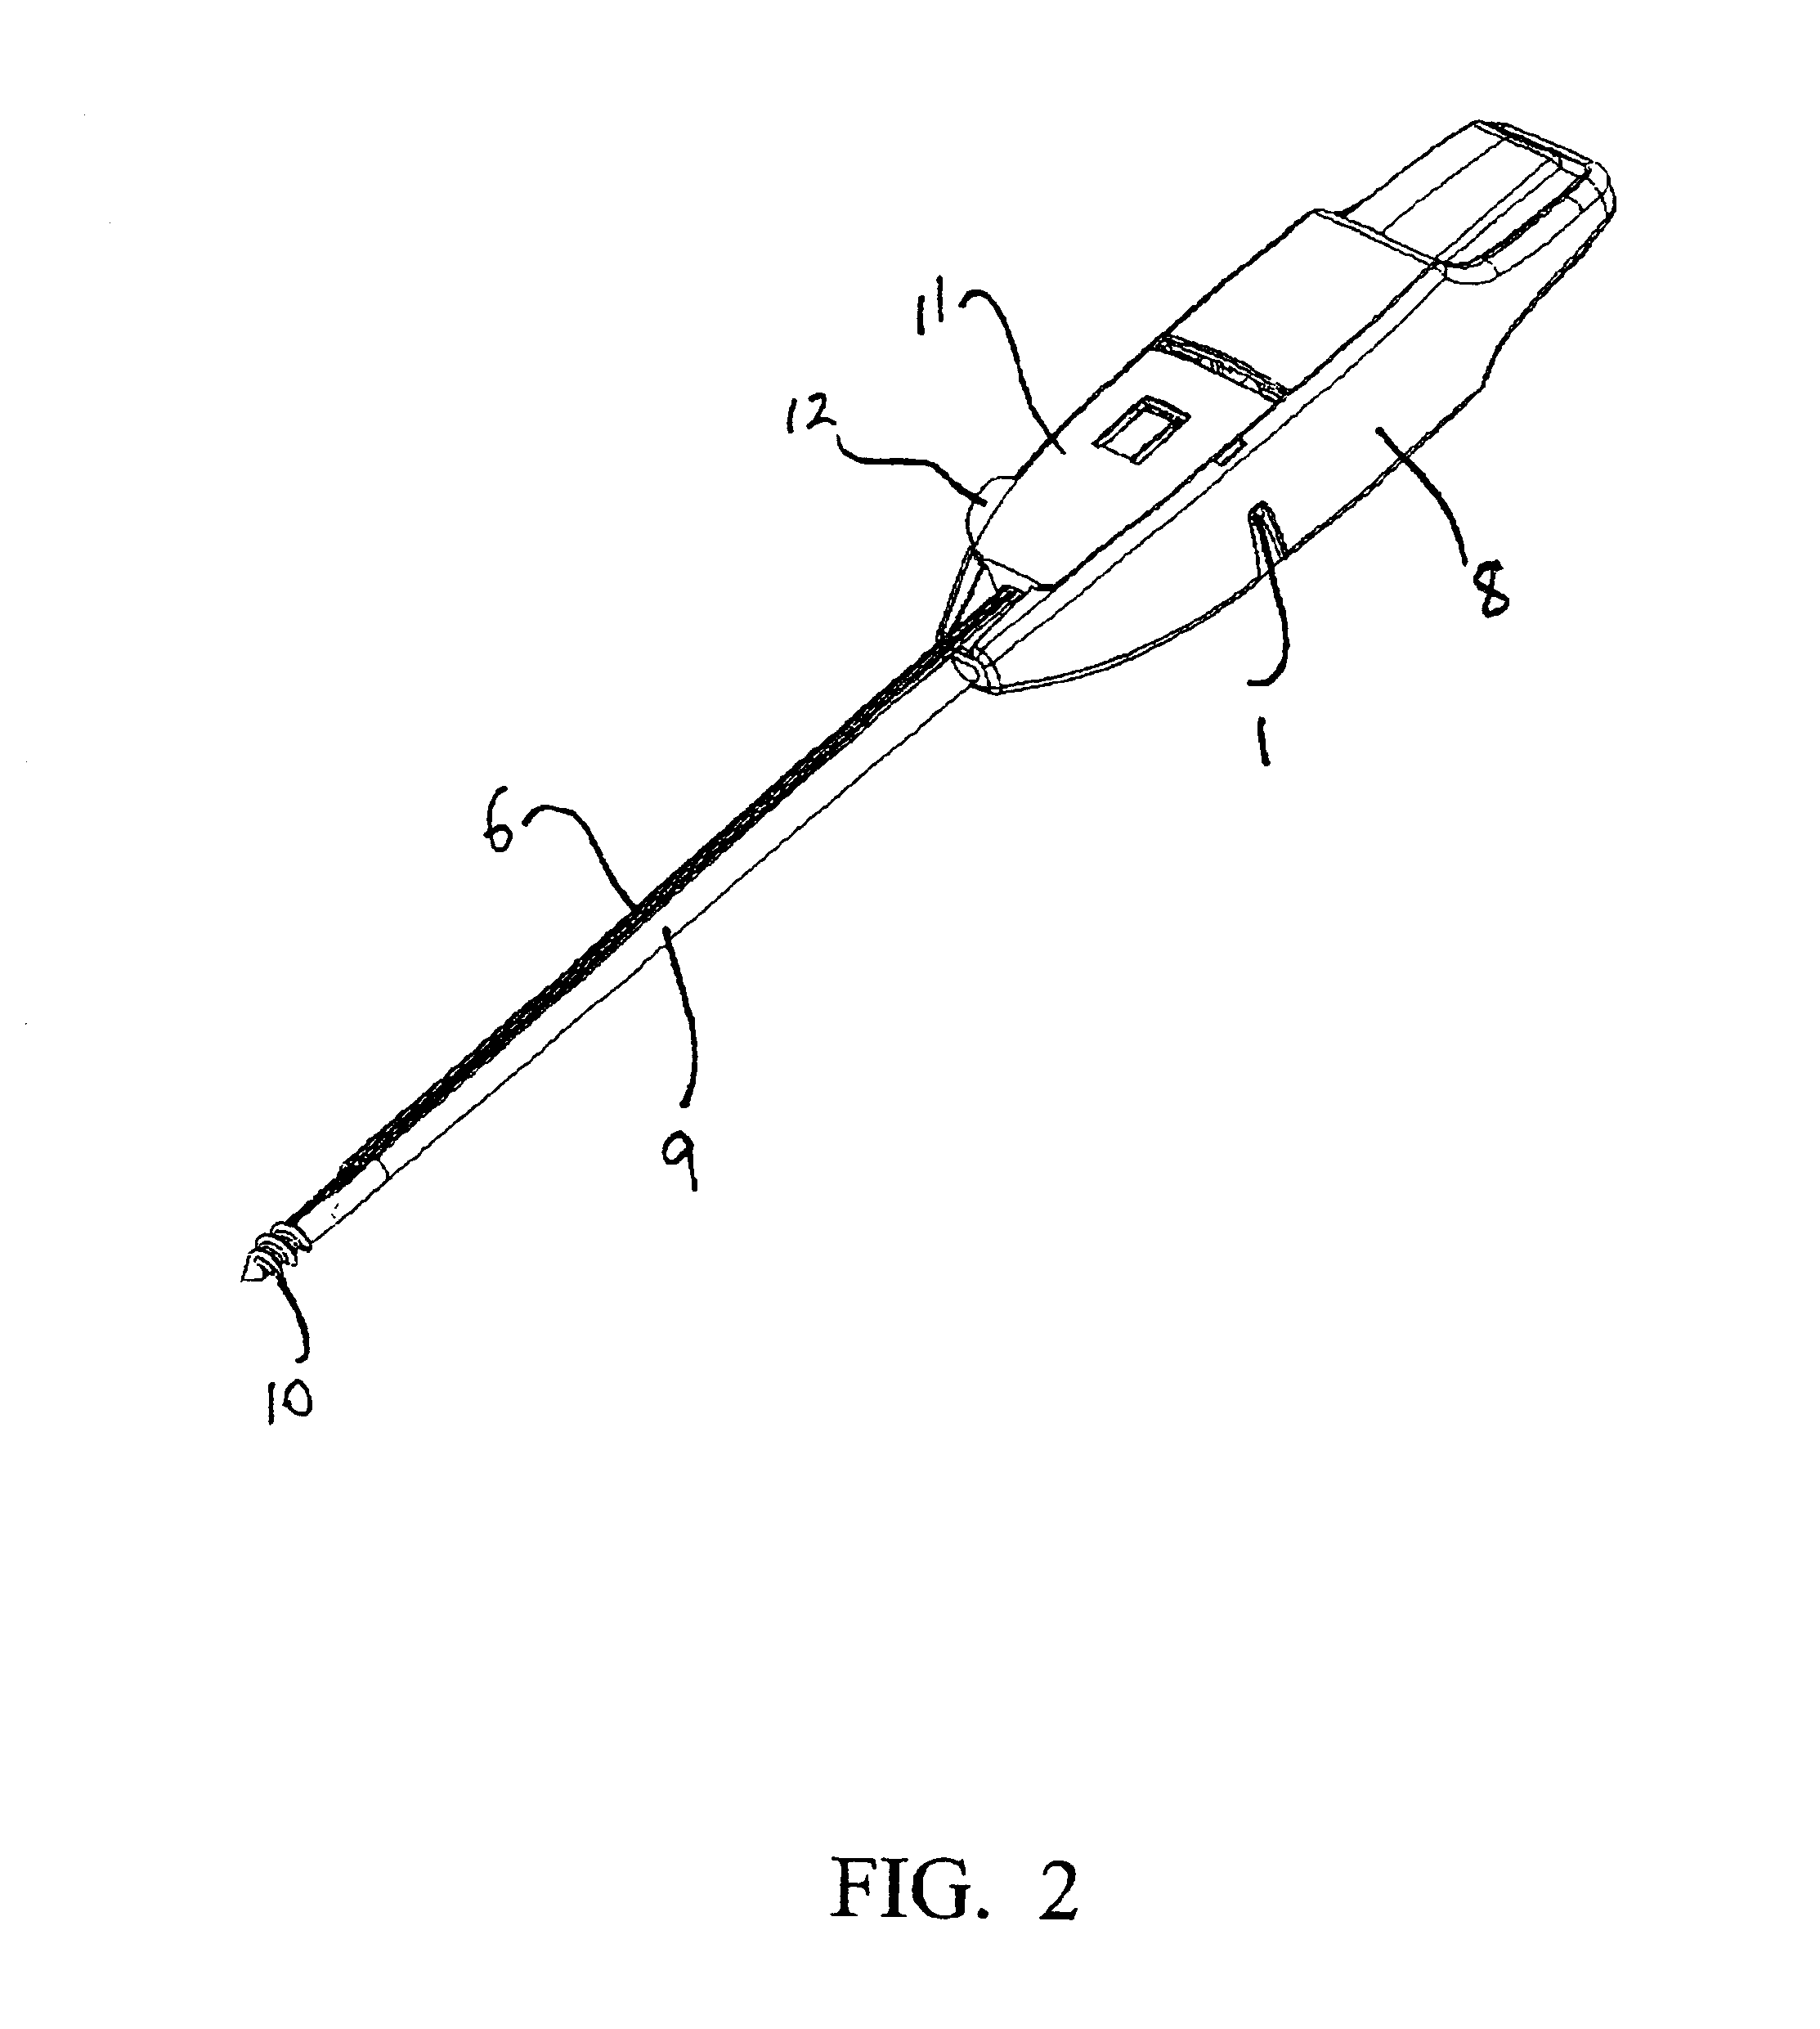 Device for inserting surgical implants